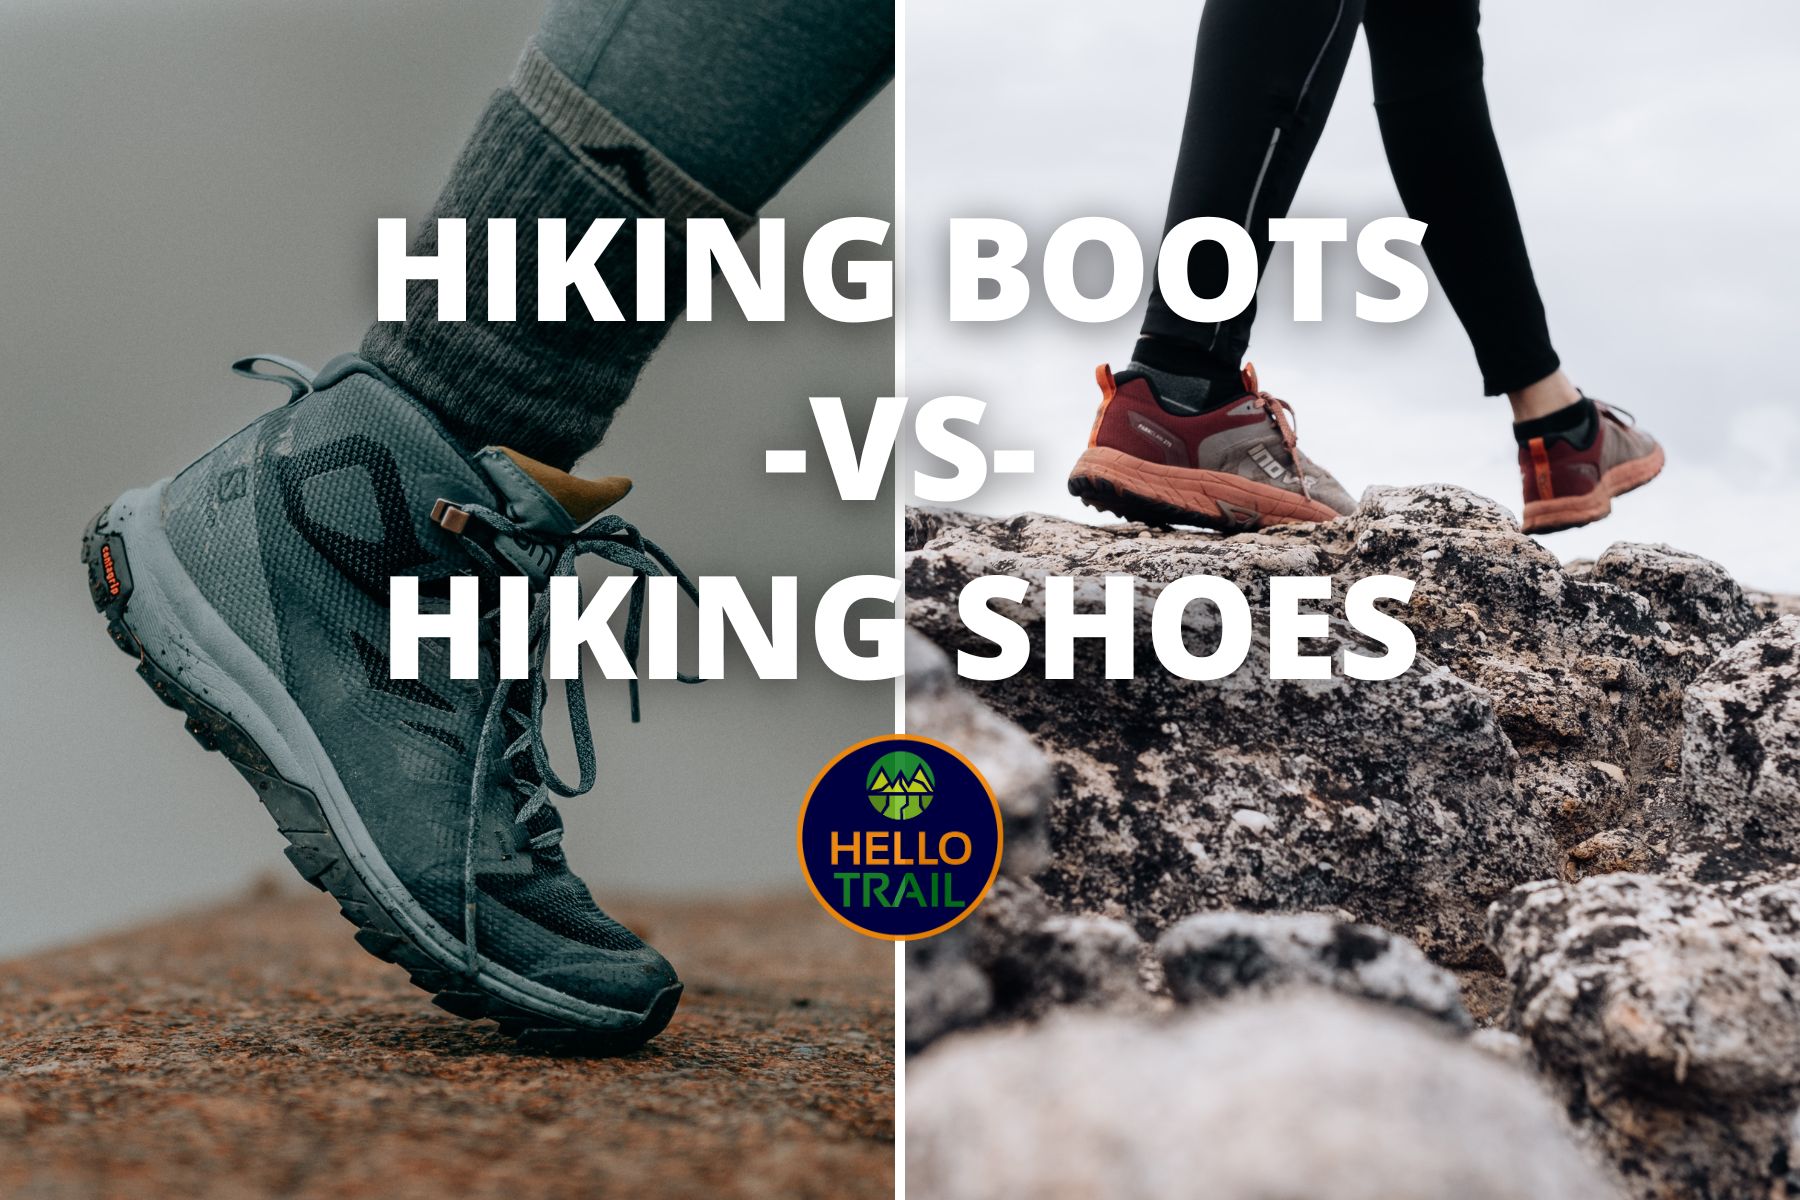 Learn the differences between hiking boots and hiking shoes